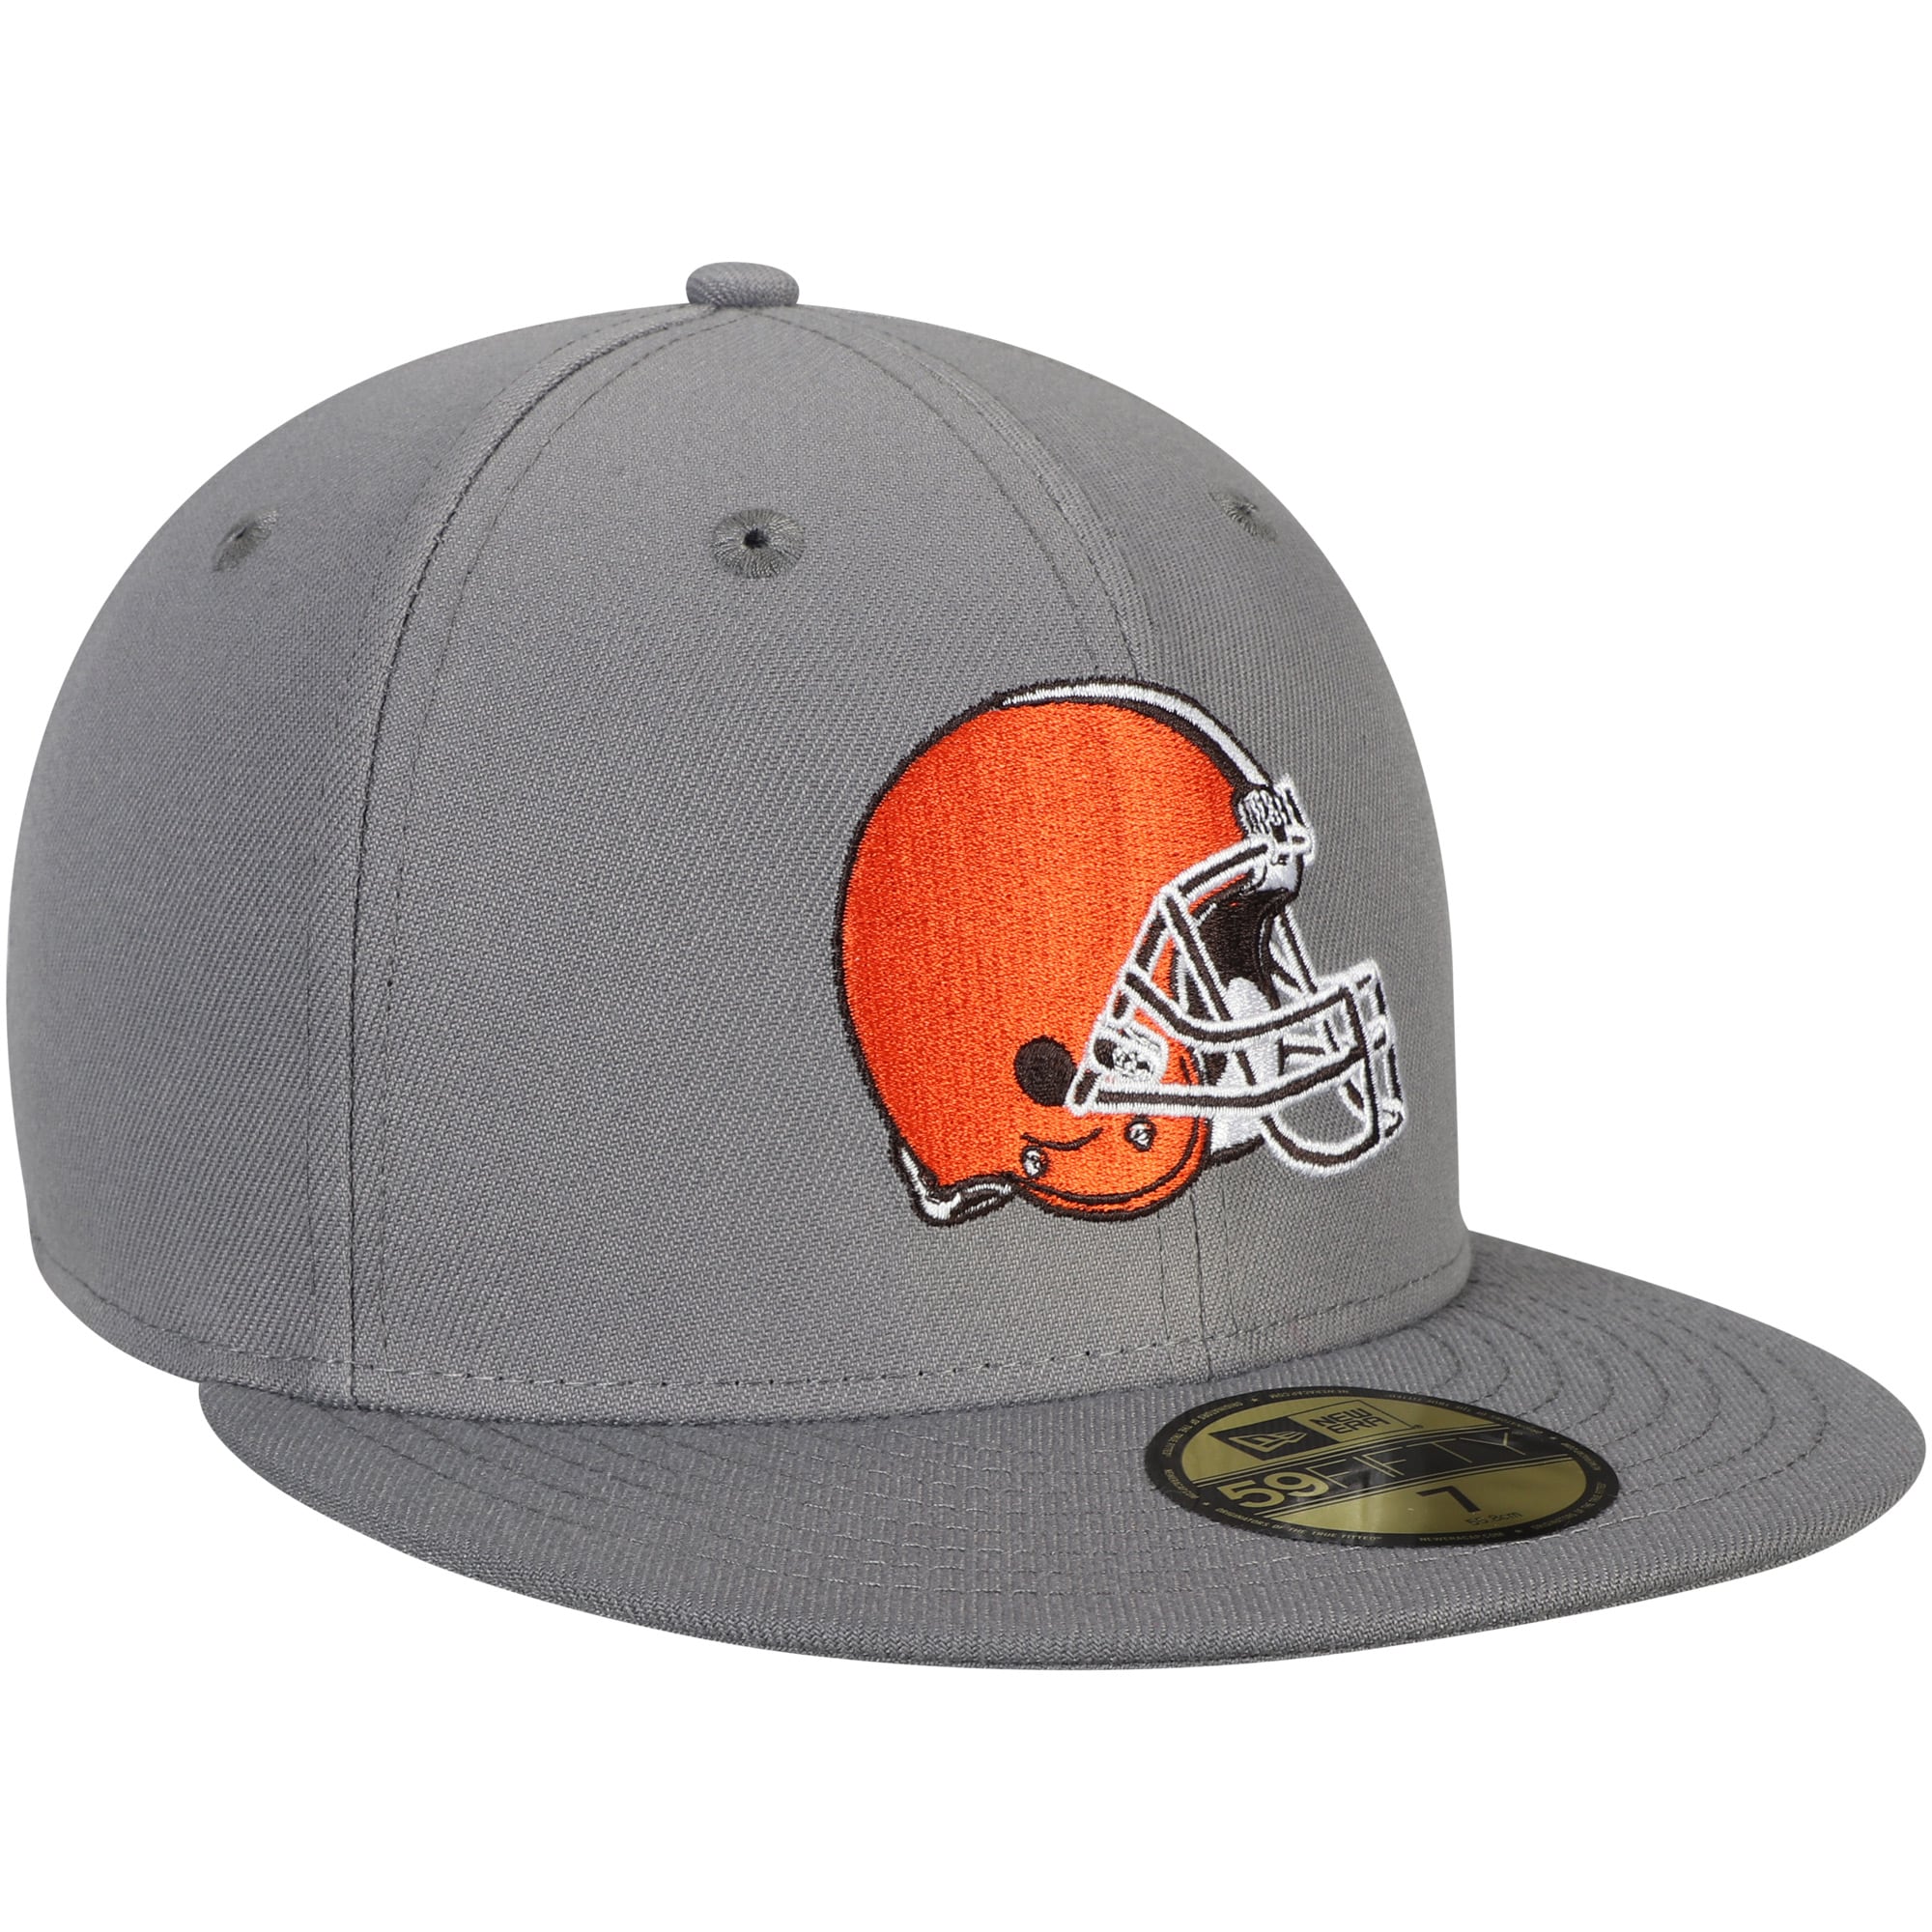 Men's New Era Graphite Cleveland Browns Storm 59FIFTY Fitted Hat - image 3 of 4